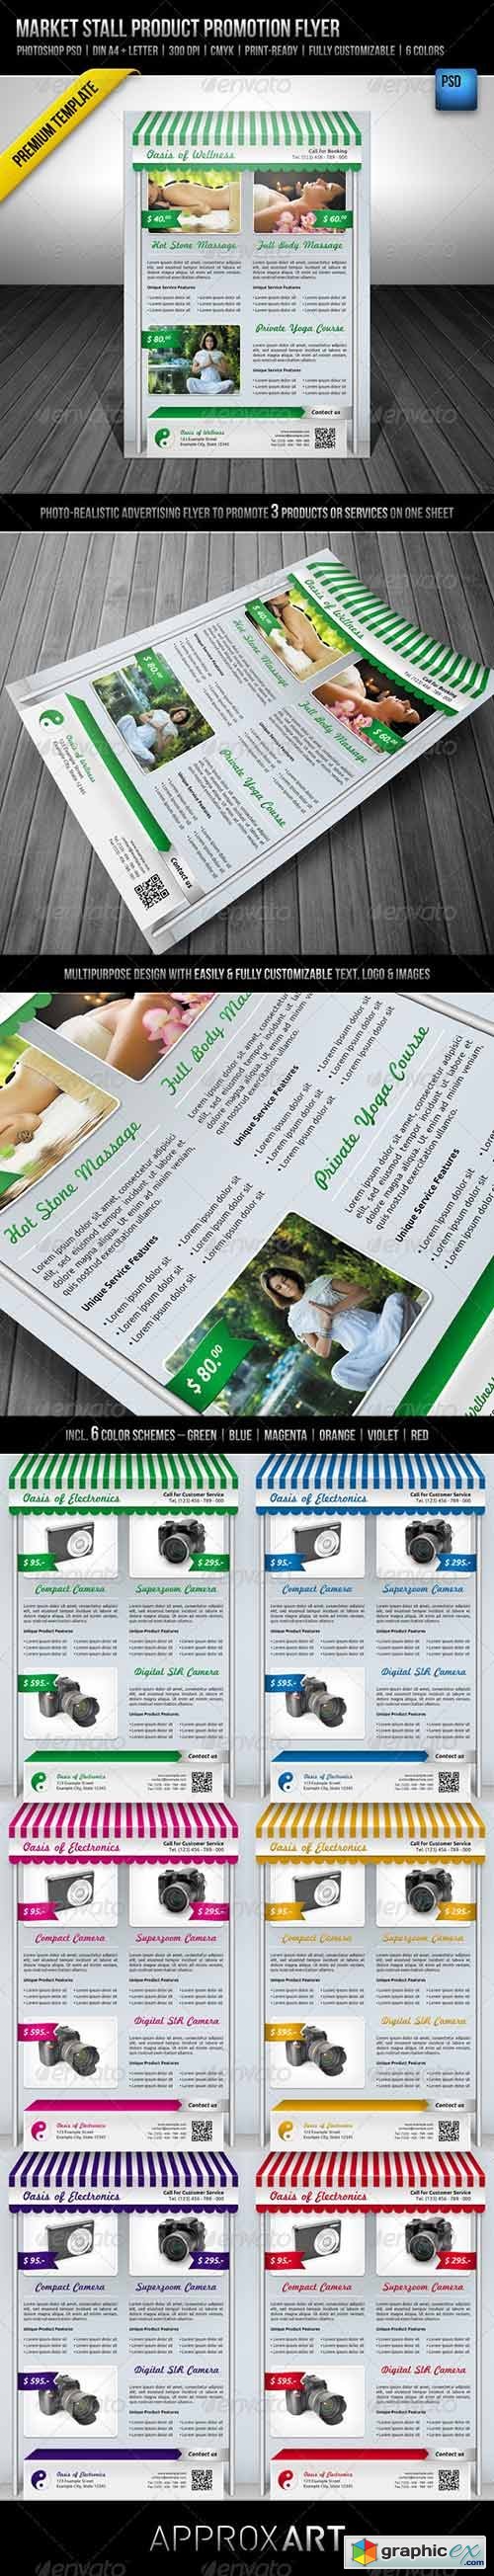 Market Stall Product Promotion Flyer